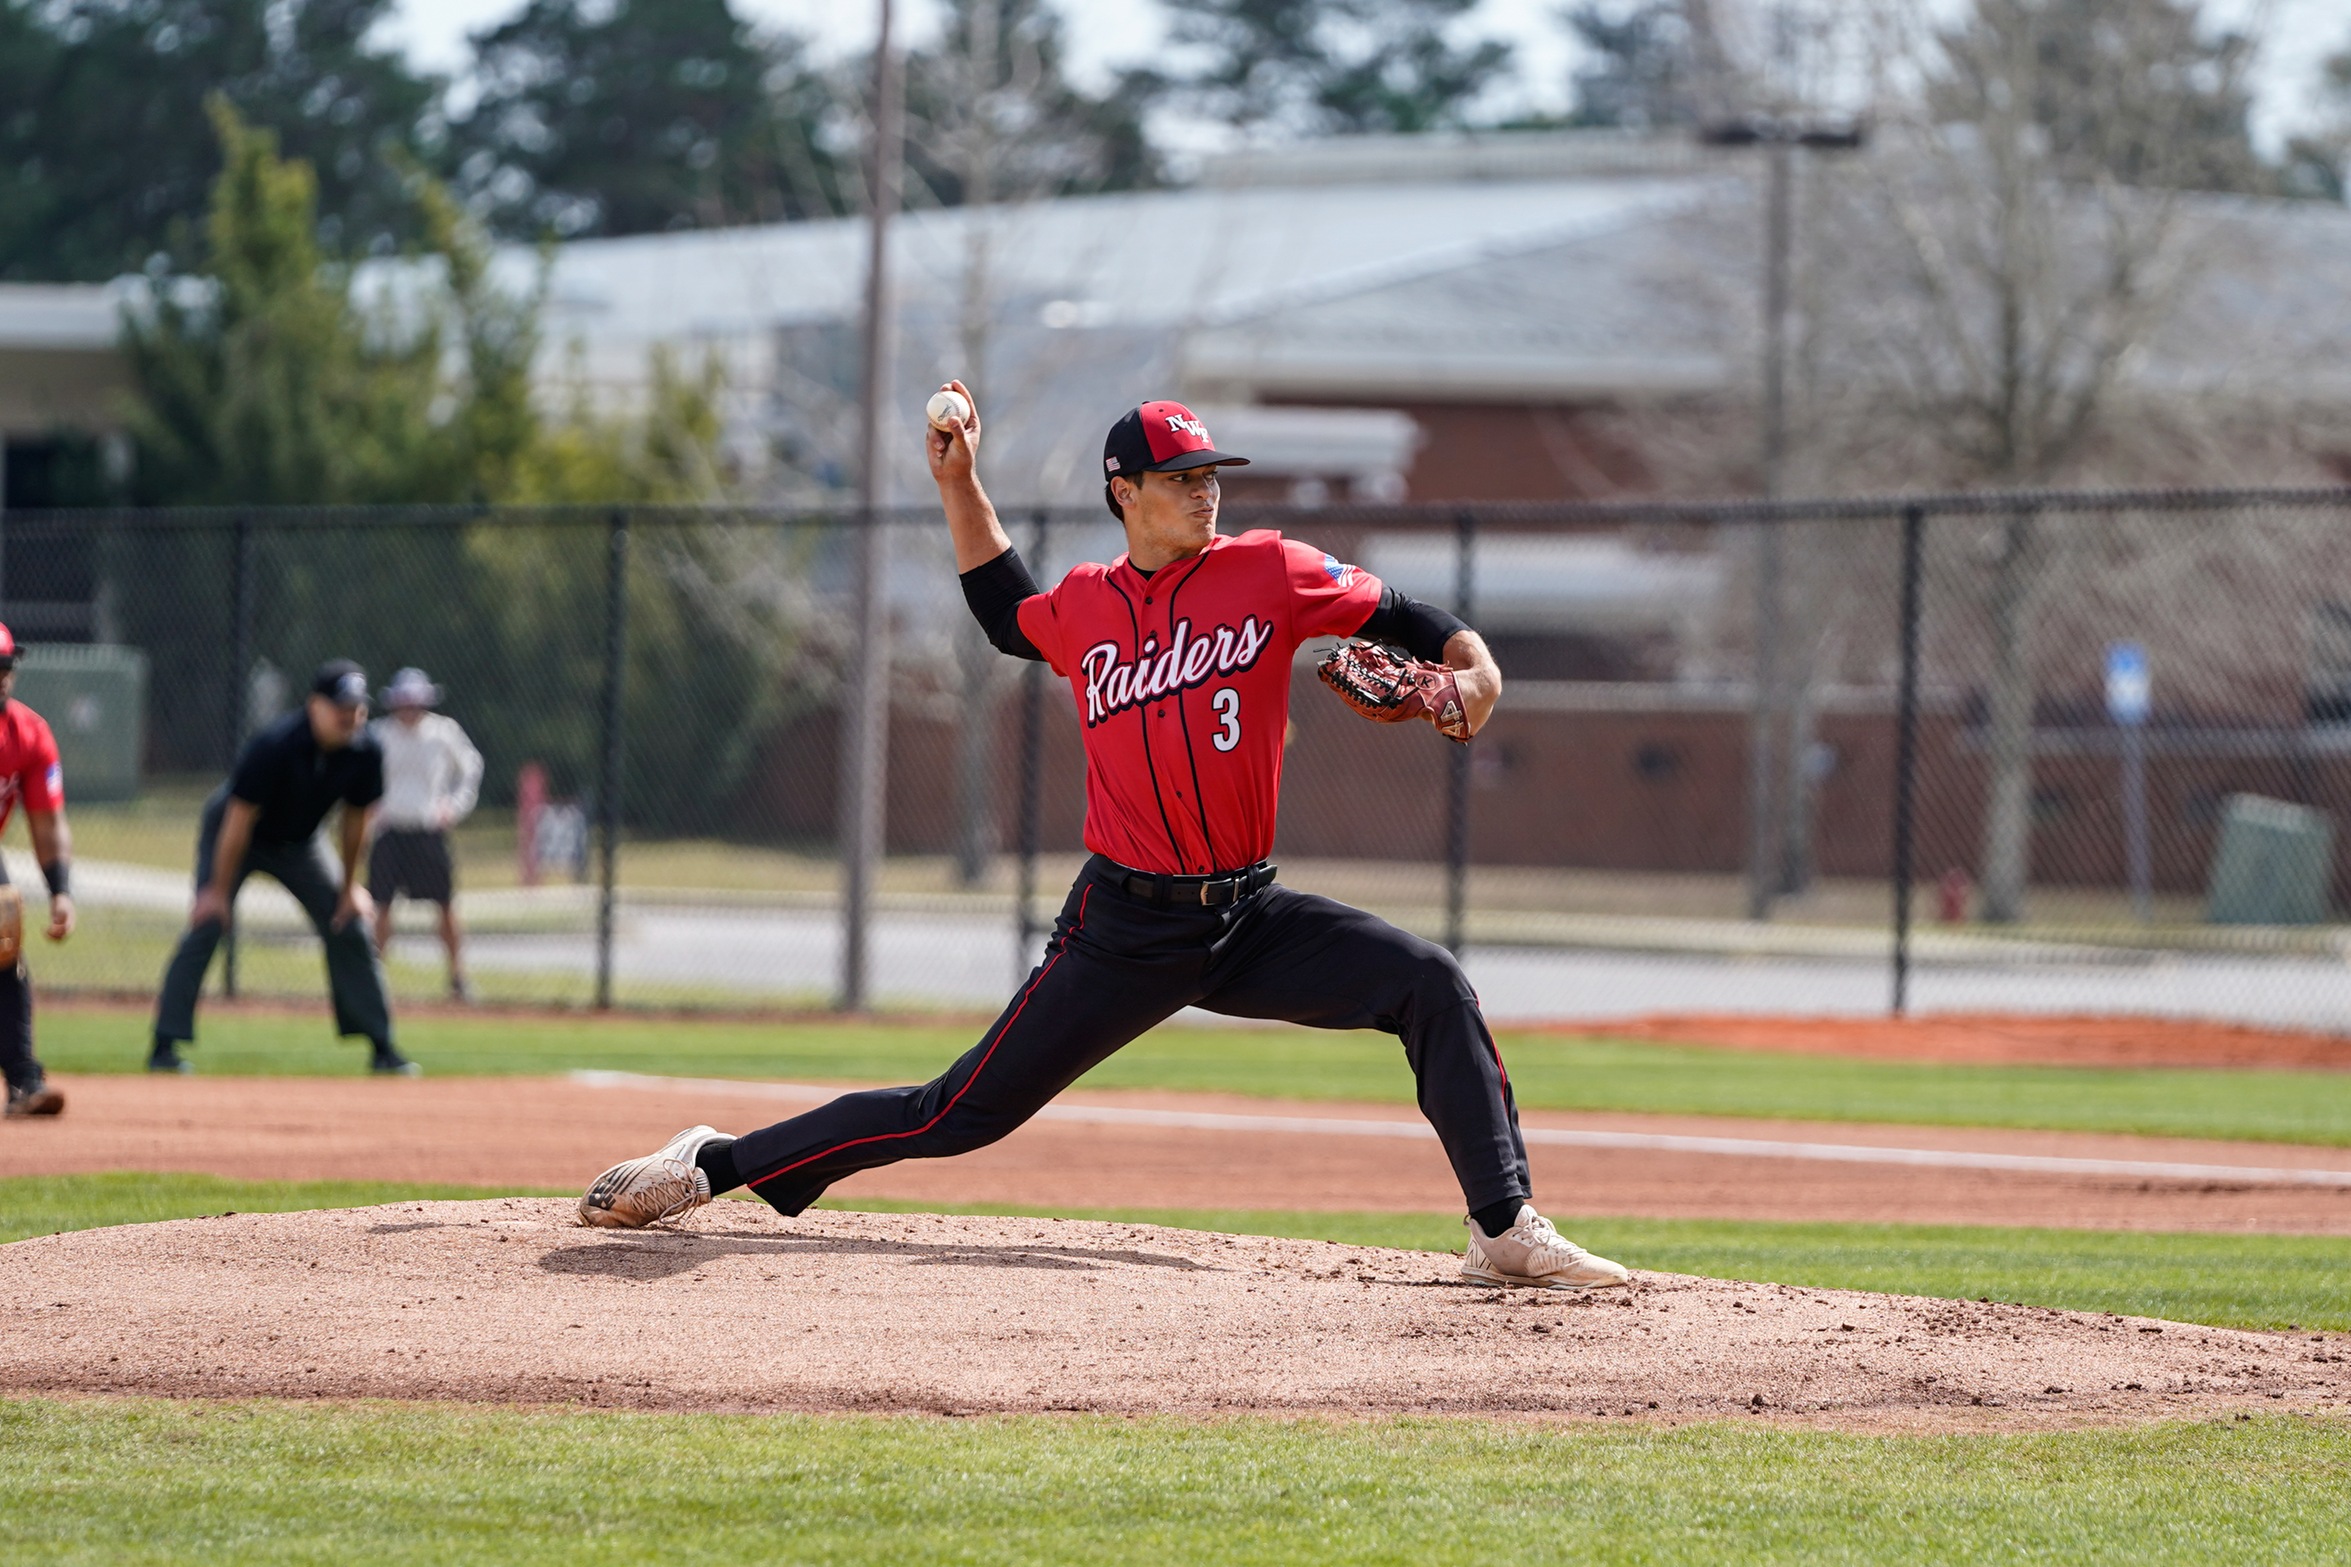 Estradas’ Ten Punch Outs Pushes NWF to Victory Over Chipola